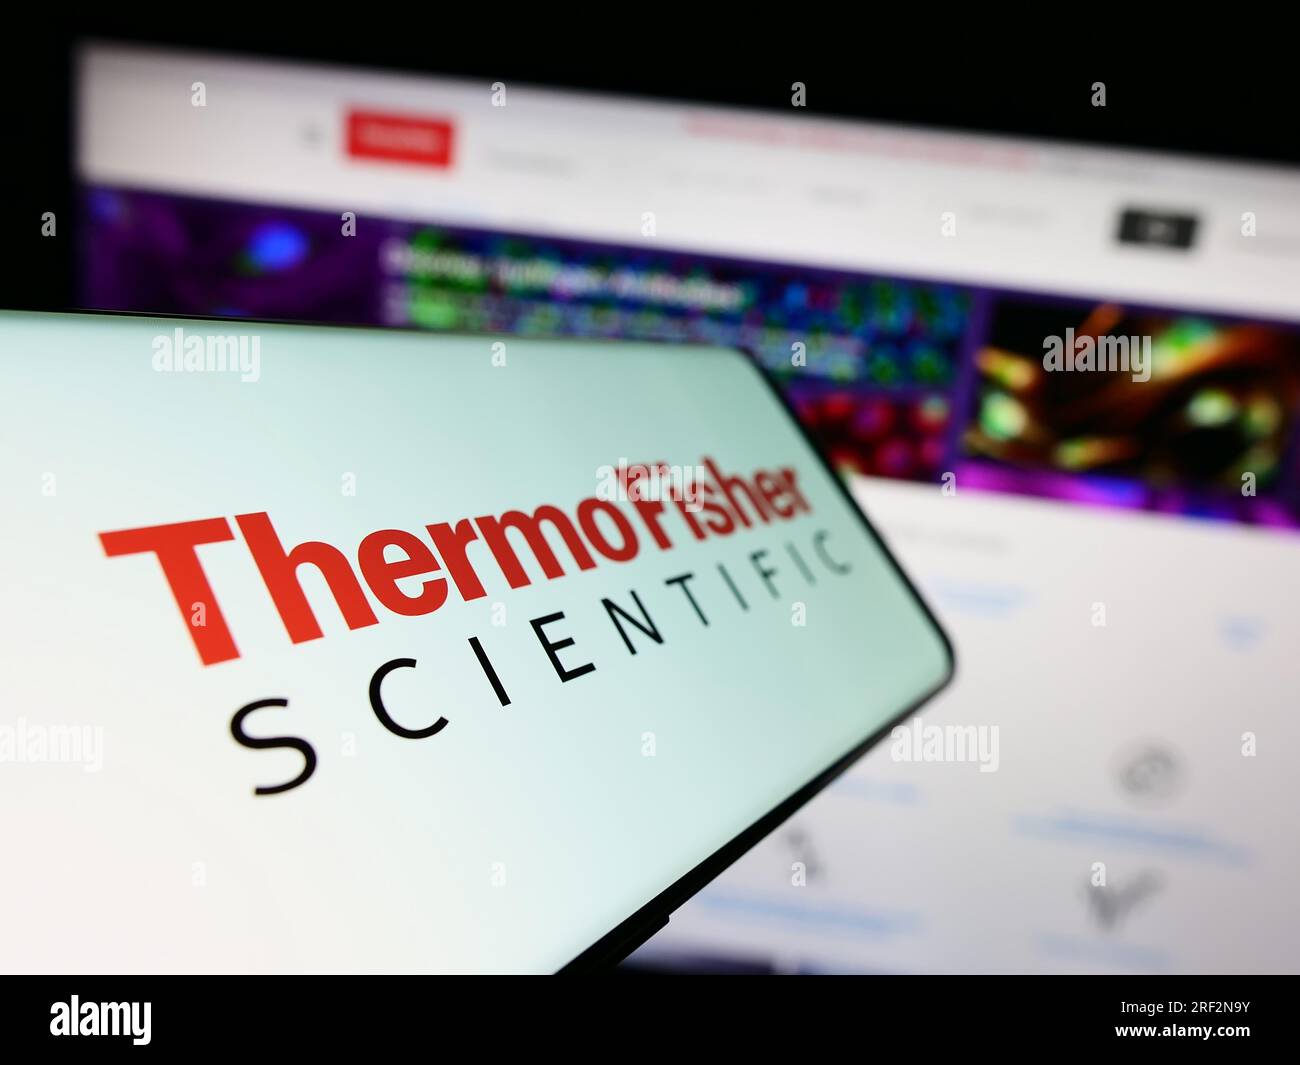 Smartphone with logo of American company Thermo Fisher Scientific Inc. on screen in front of business website. Focus on left of phone display. Stock Photo